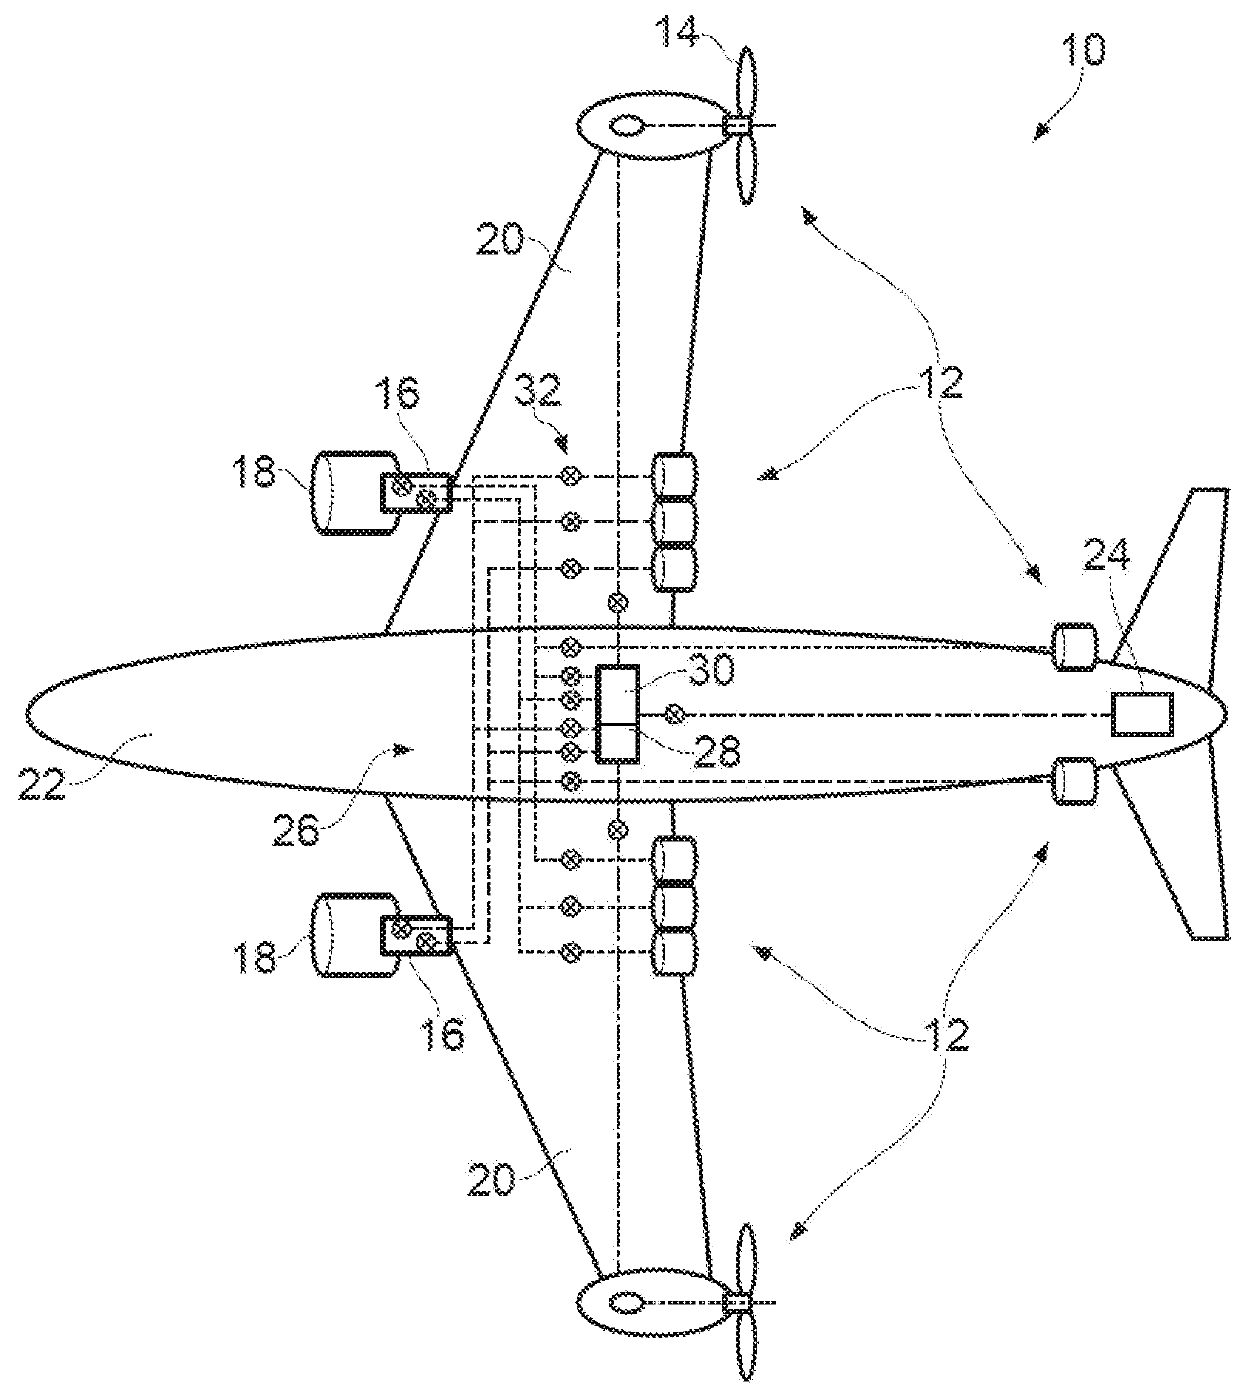 Aircraft Electrically-Assisted Propulsion Control System